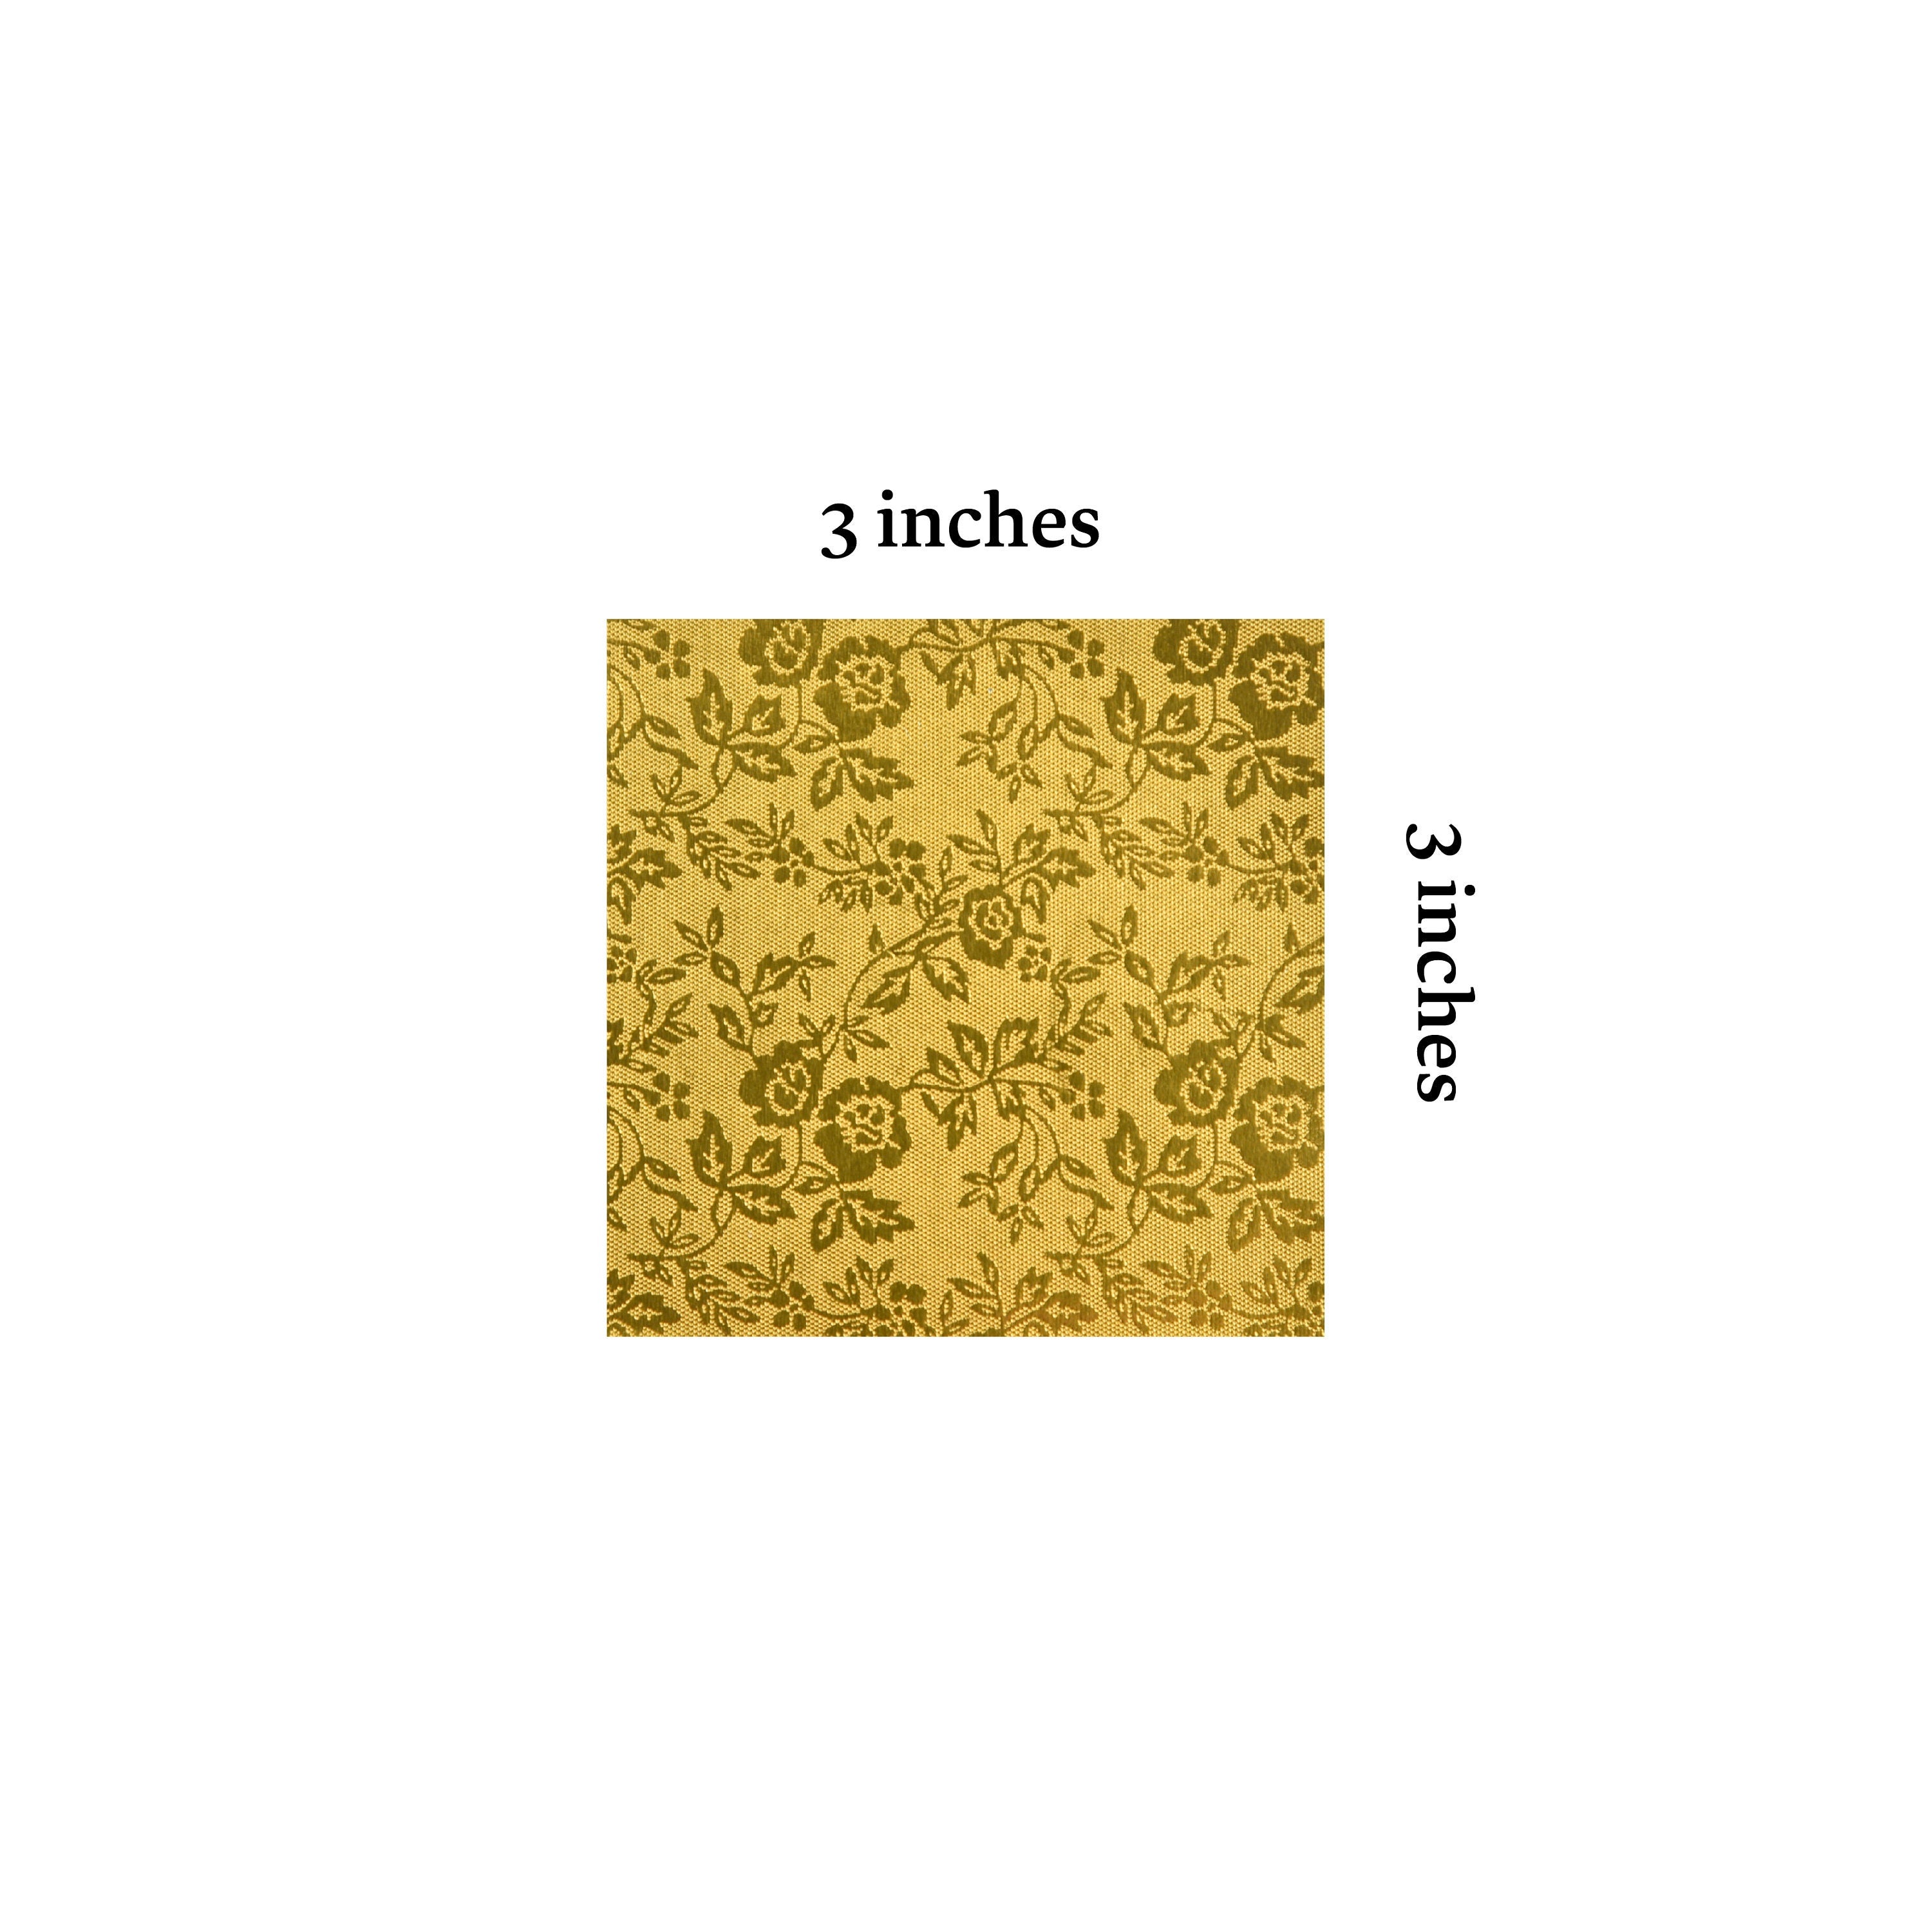 100 Gold Origami Paper Sheets 3x3 inches Colored Paper Pack